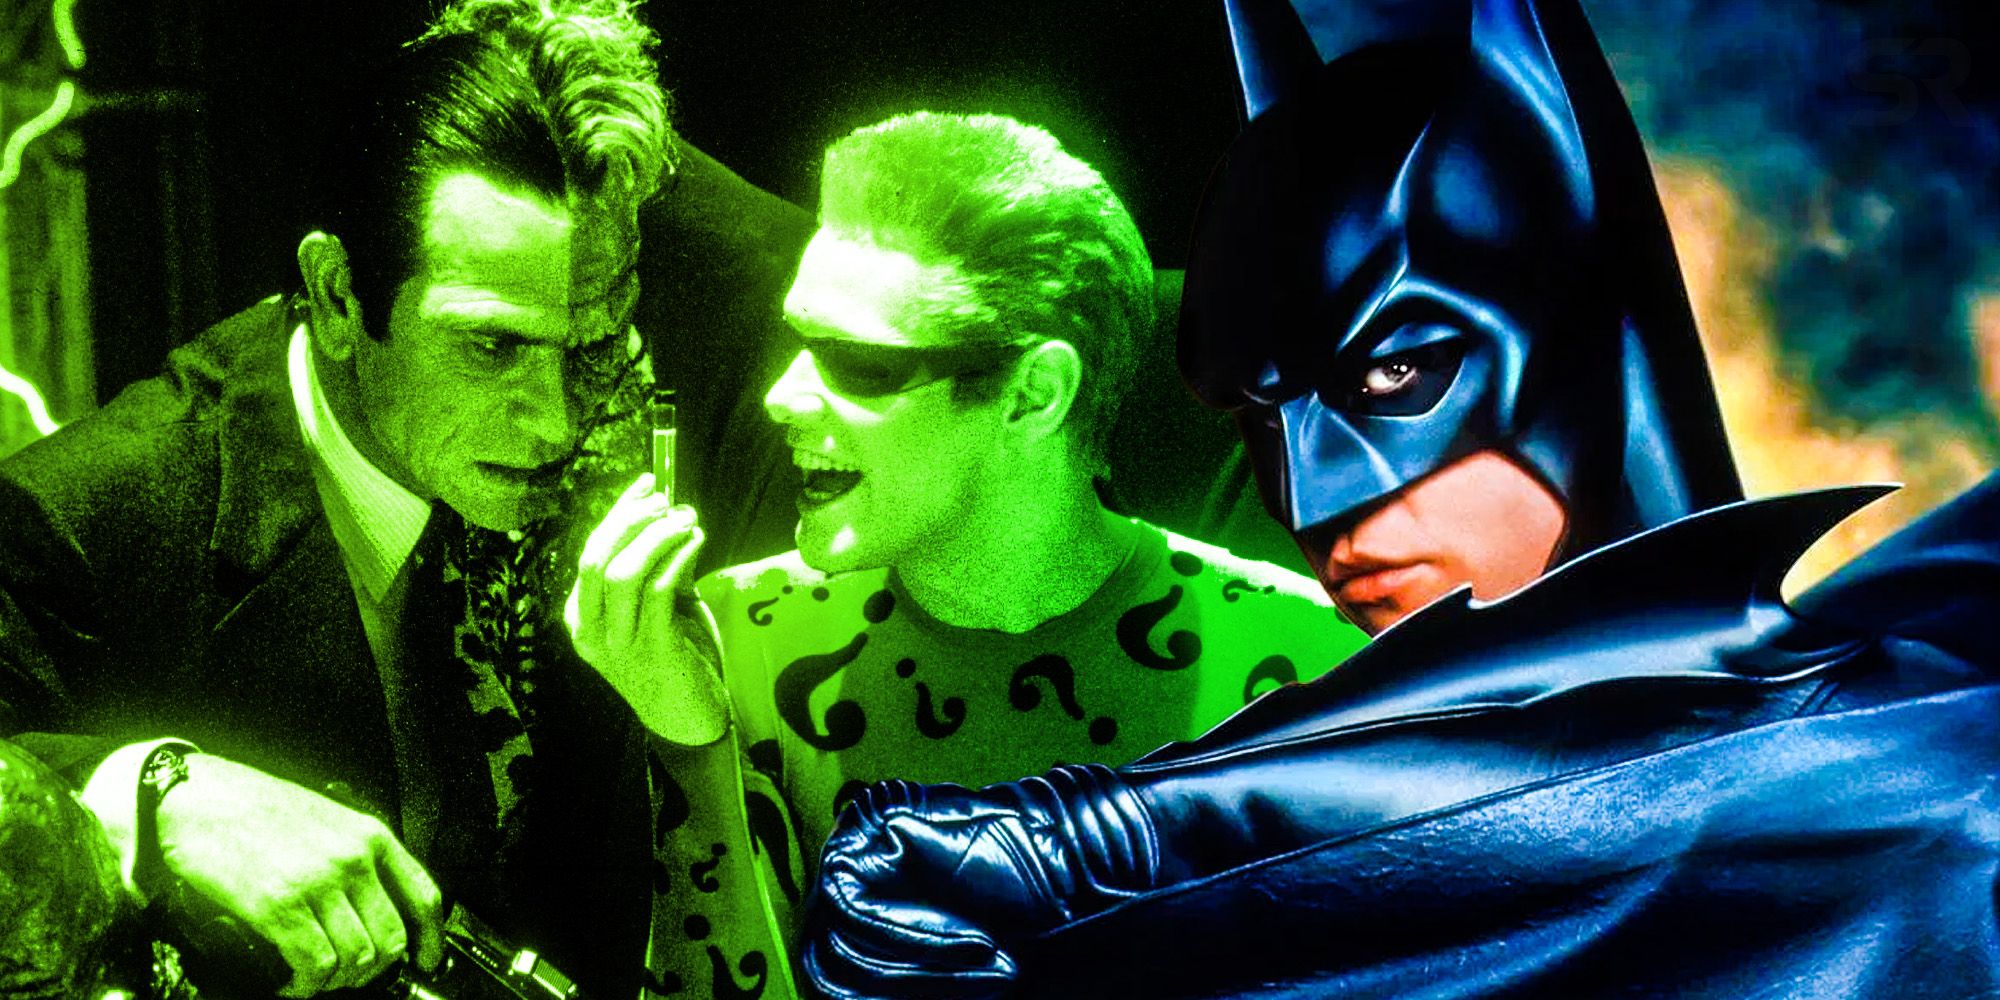 Batman forever biggest Problem Was Using Riddler AND Two-Face